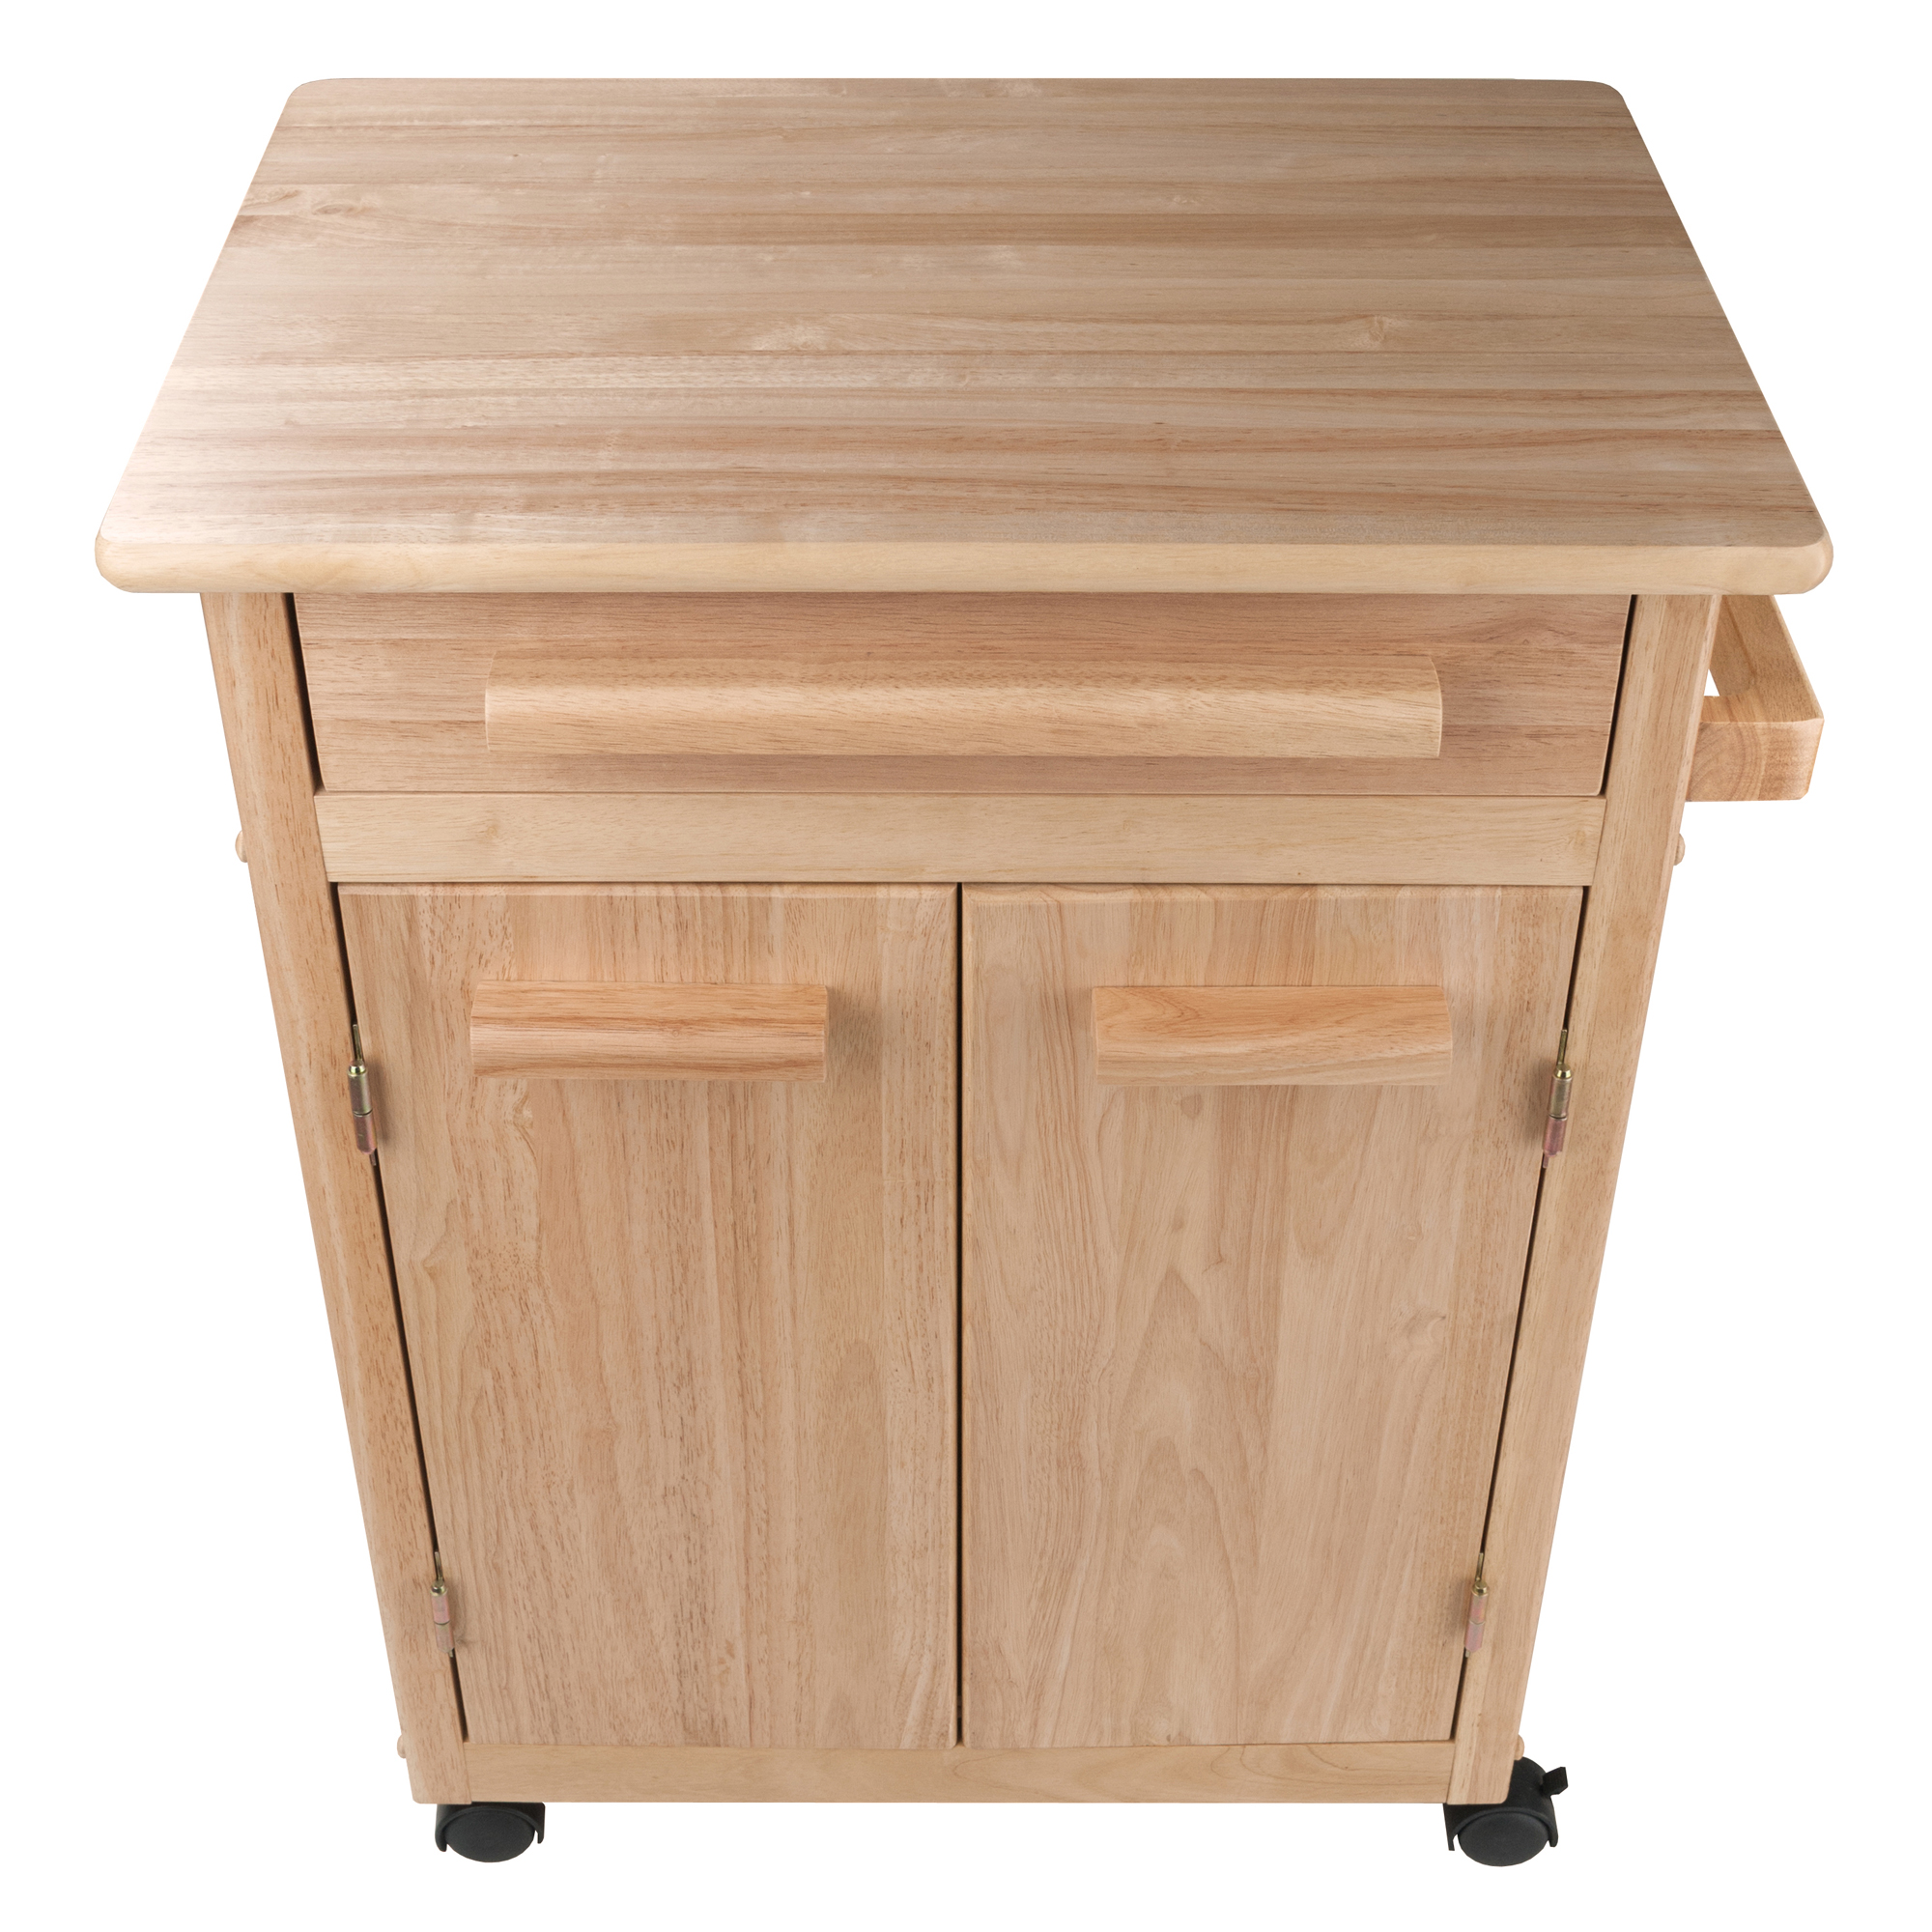 Winsome Wood Hackett Kitchen Utility Cart, Natural Finish - image 4 of 11